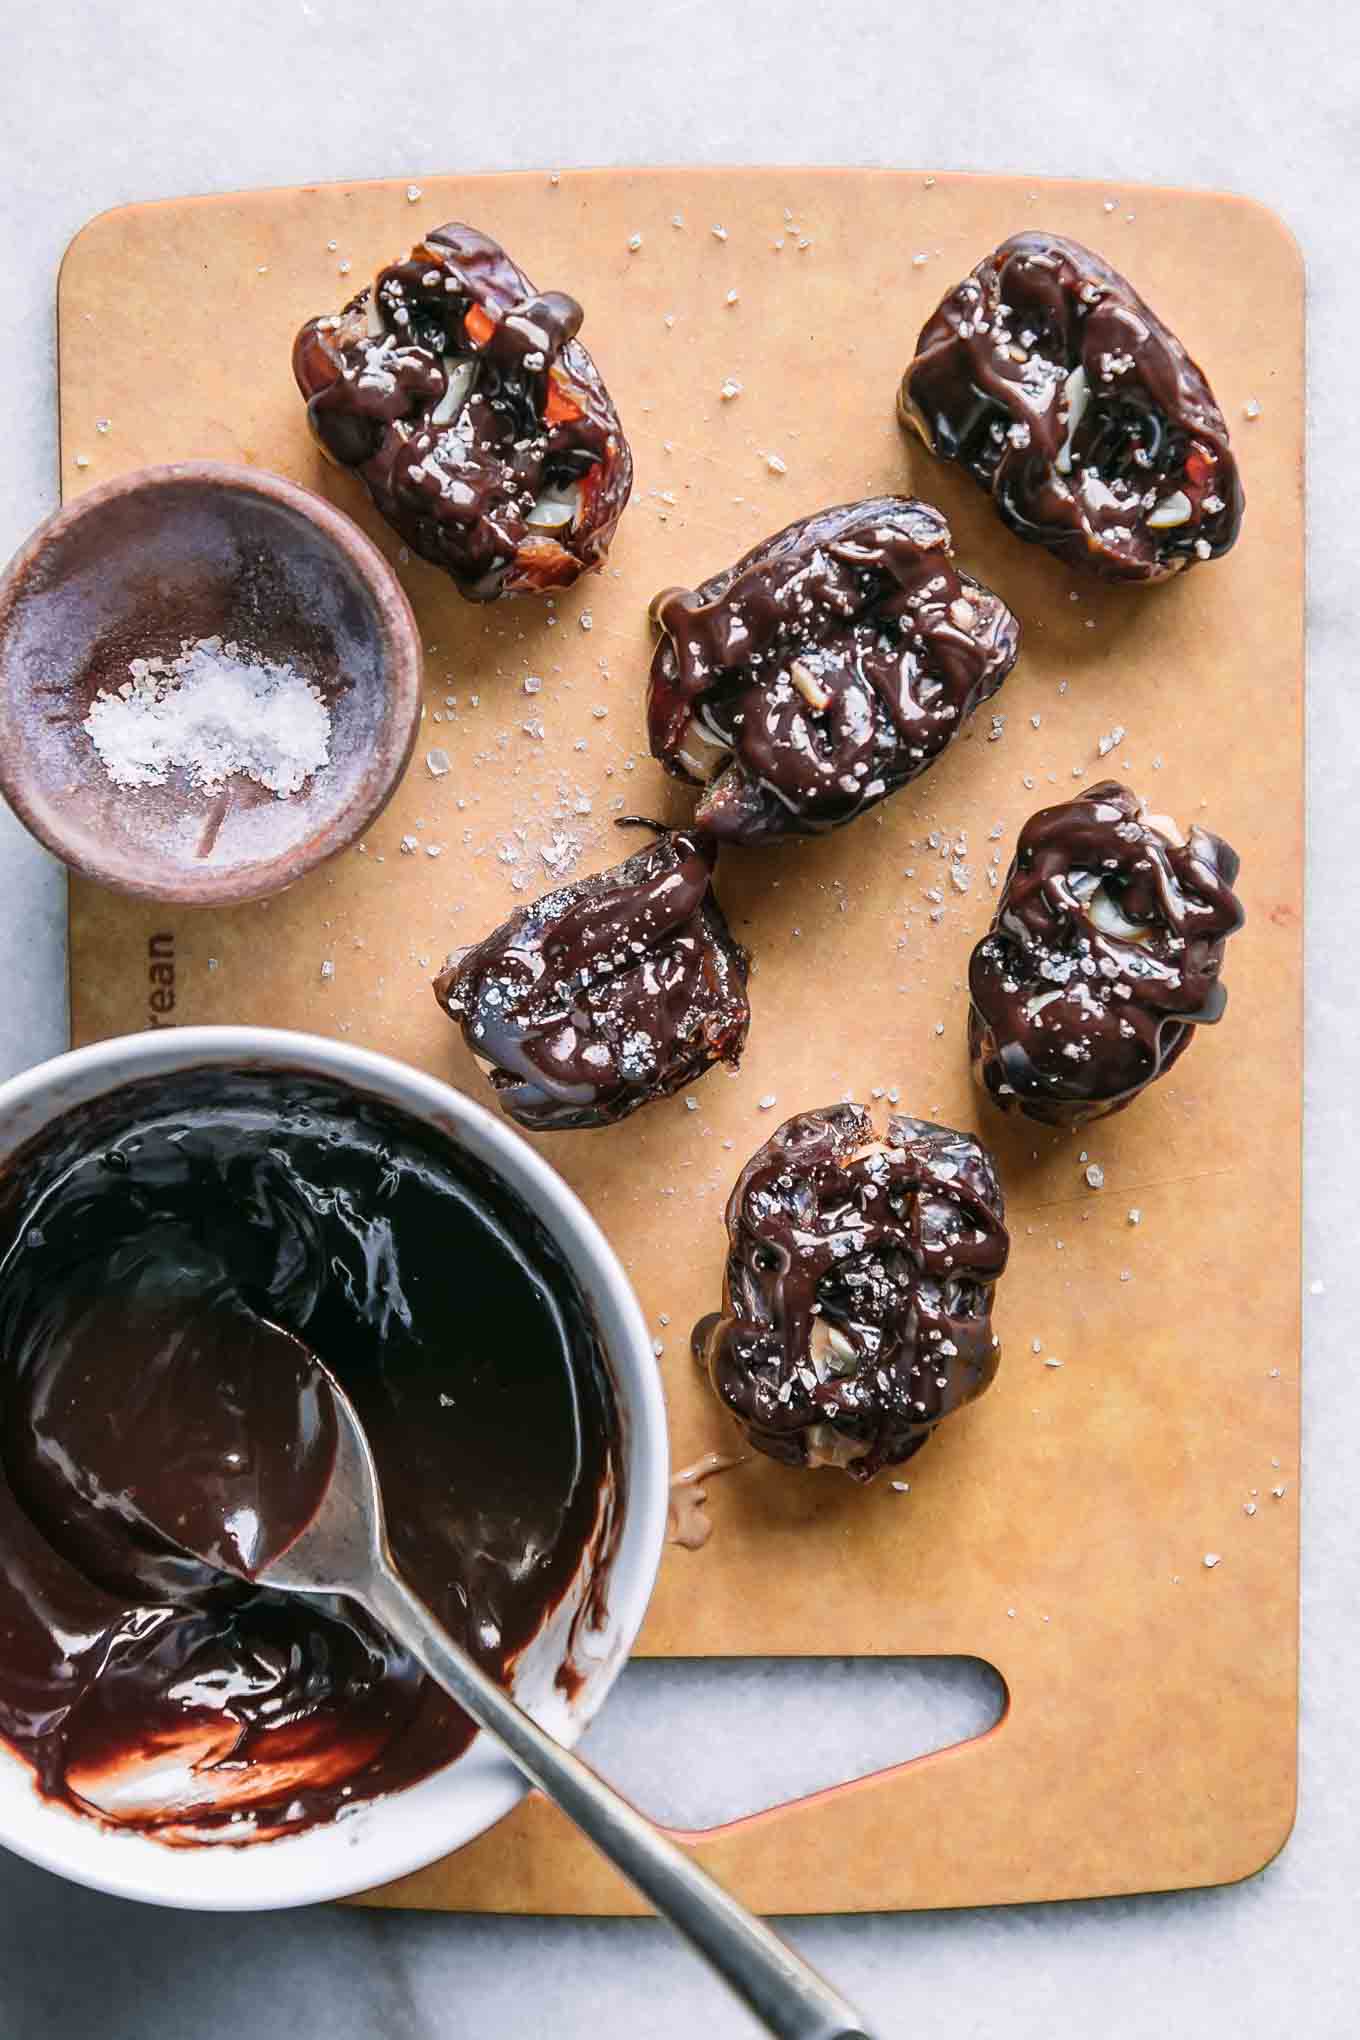 dates stuffed with peanut butter and drizzled with melted chocolate on a wood cutting board